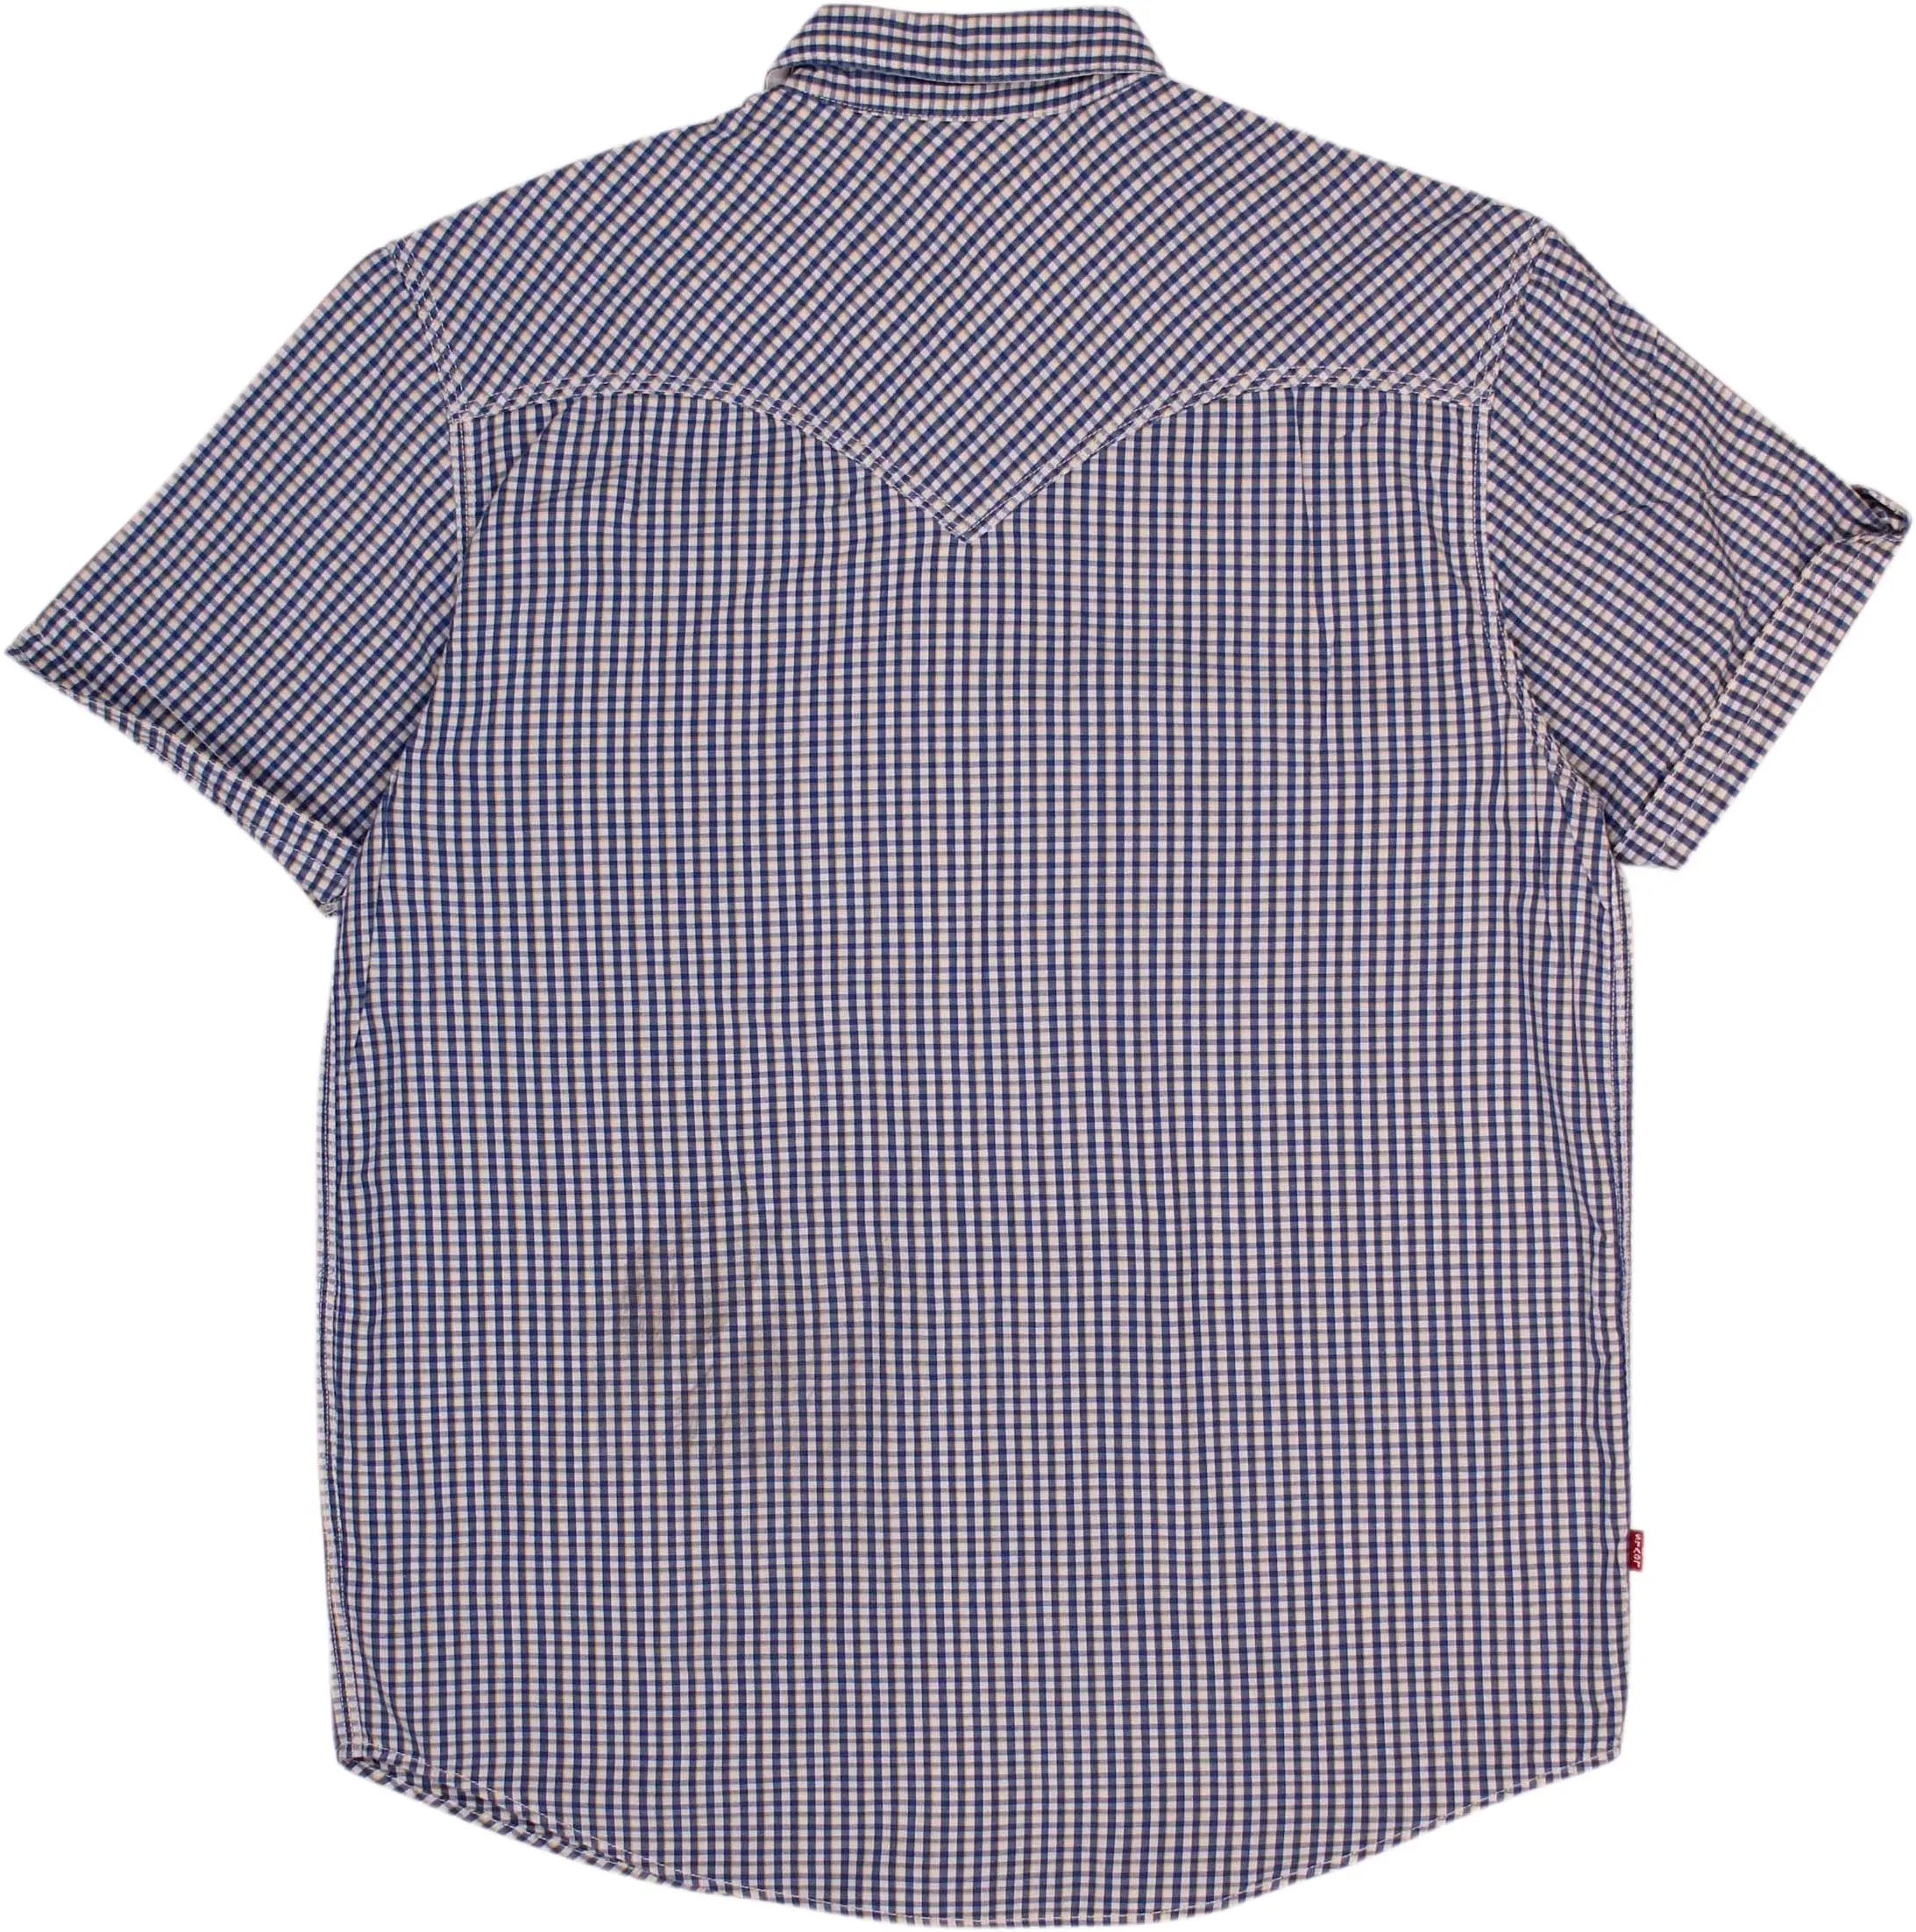 Levi's - Blue Checked Short Sleeve Shirt by Levi's- ThriftTale.com - Vintage and second handclothing